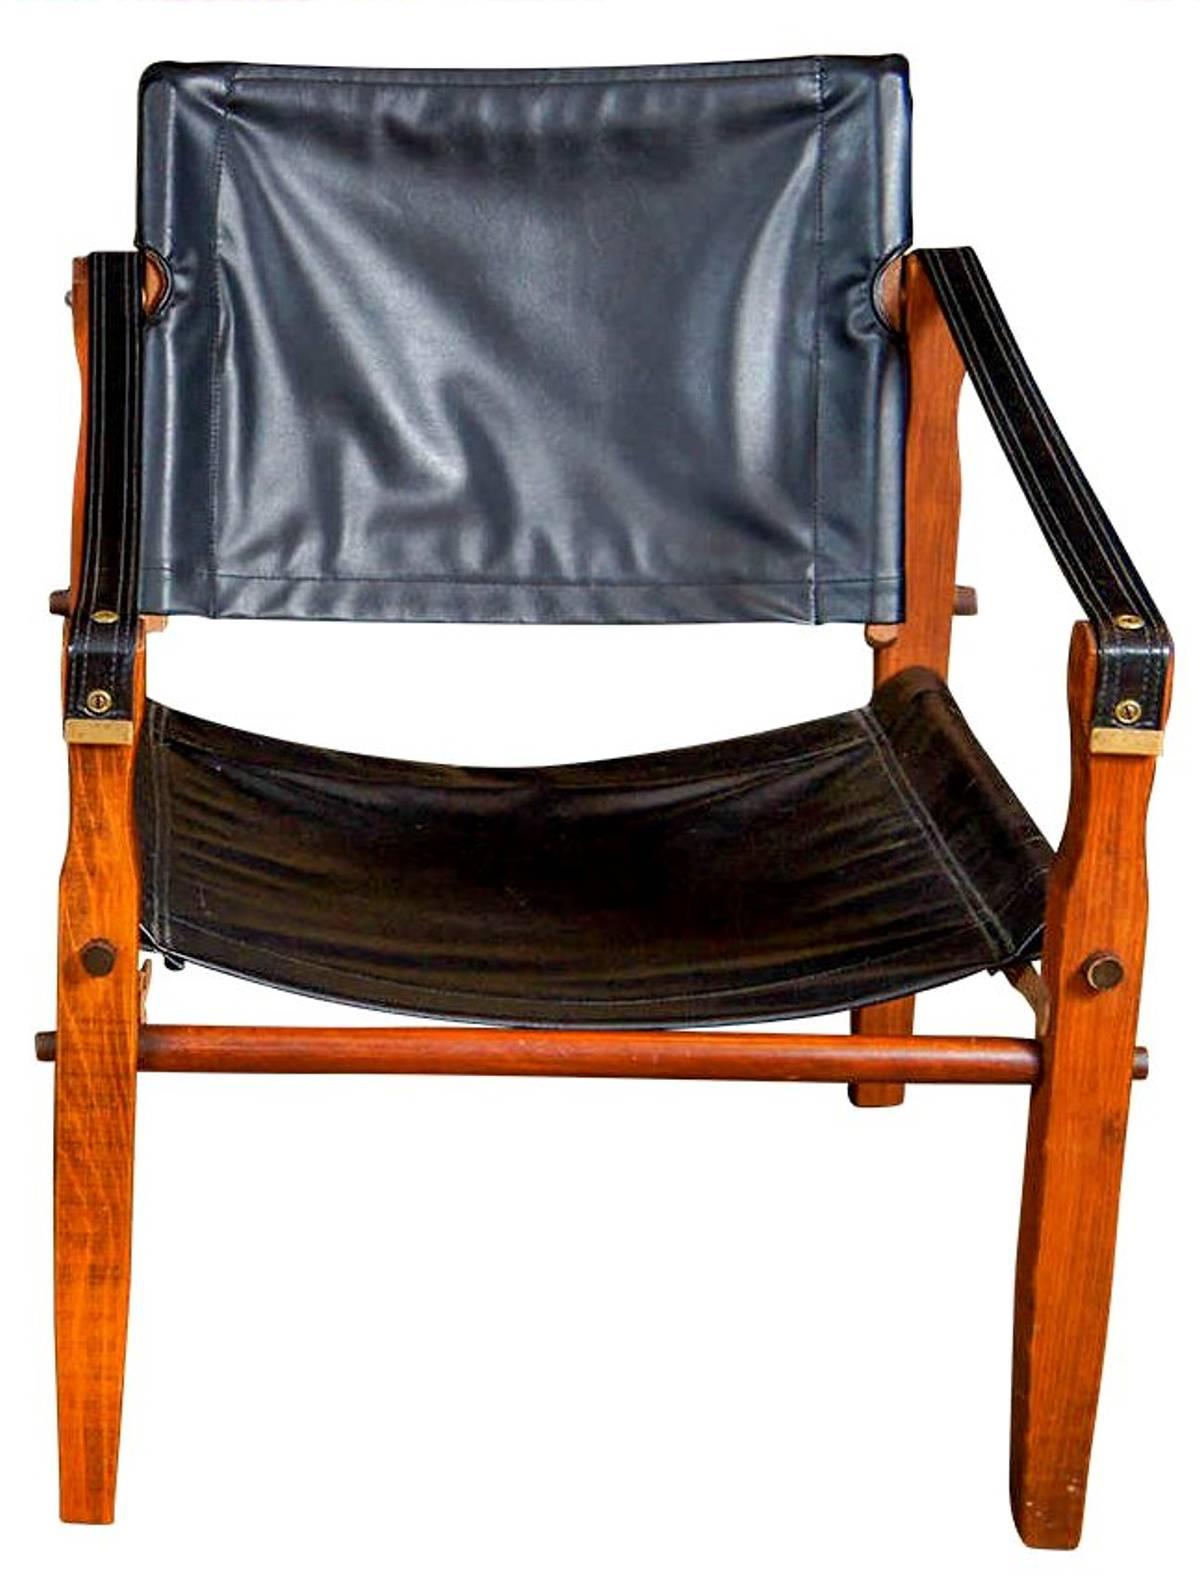 The safari chair from Gold Medal Folding Furniture Company of Racine, WI is patterned after the Scirocco Safari Chair by Arne Norell, a design classic from 1965. This one is upholstered in black vinyl and, of course, folds.

A few important notes